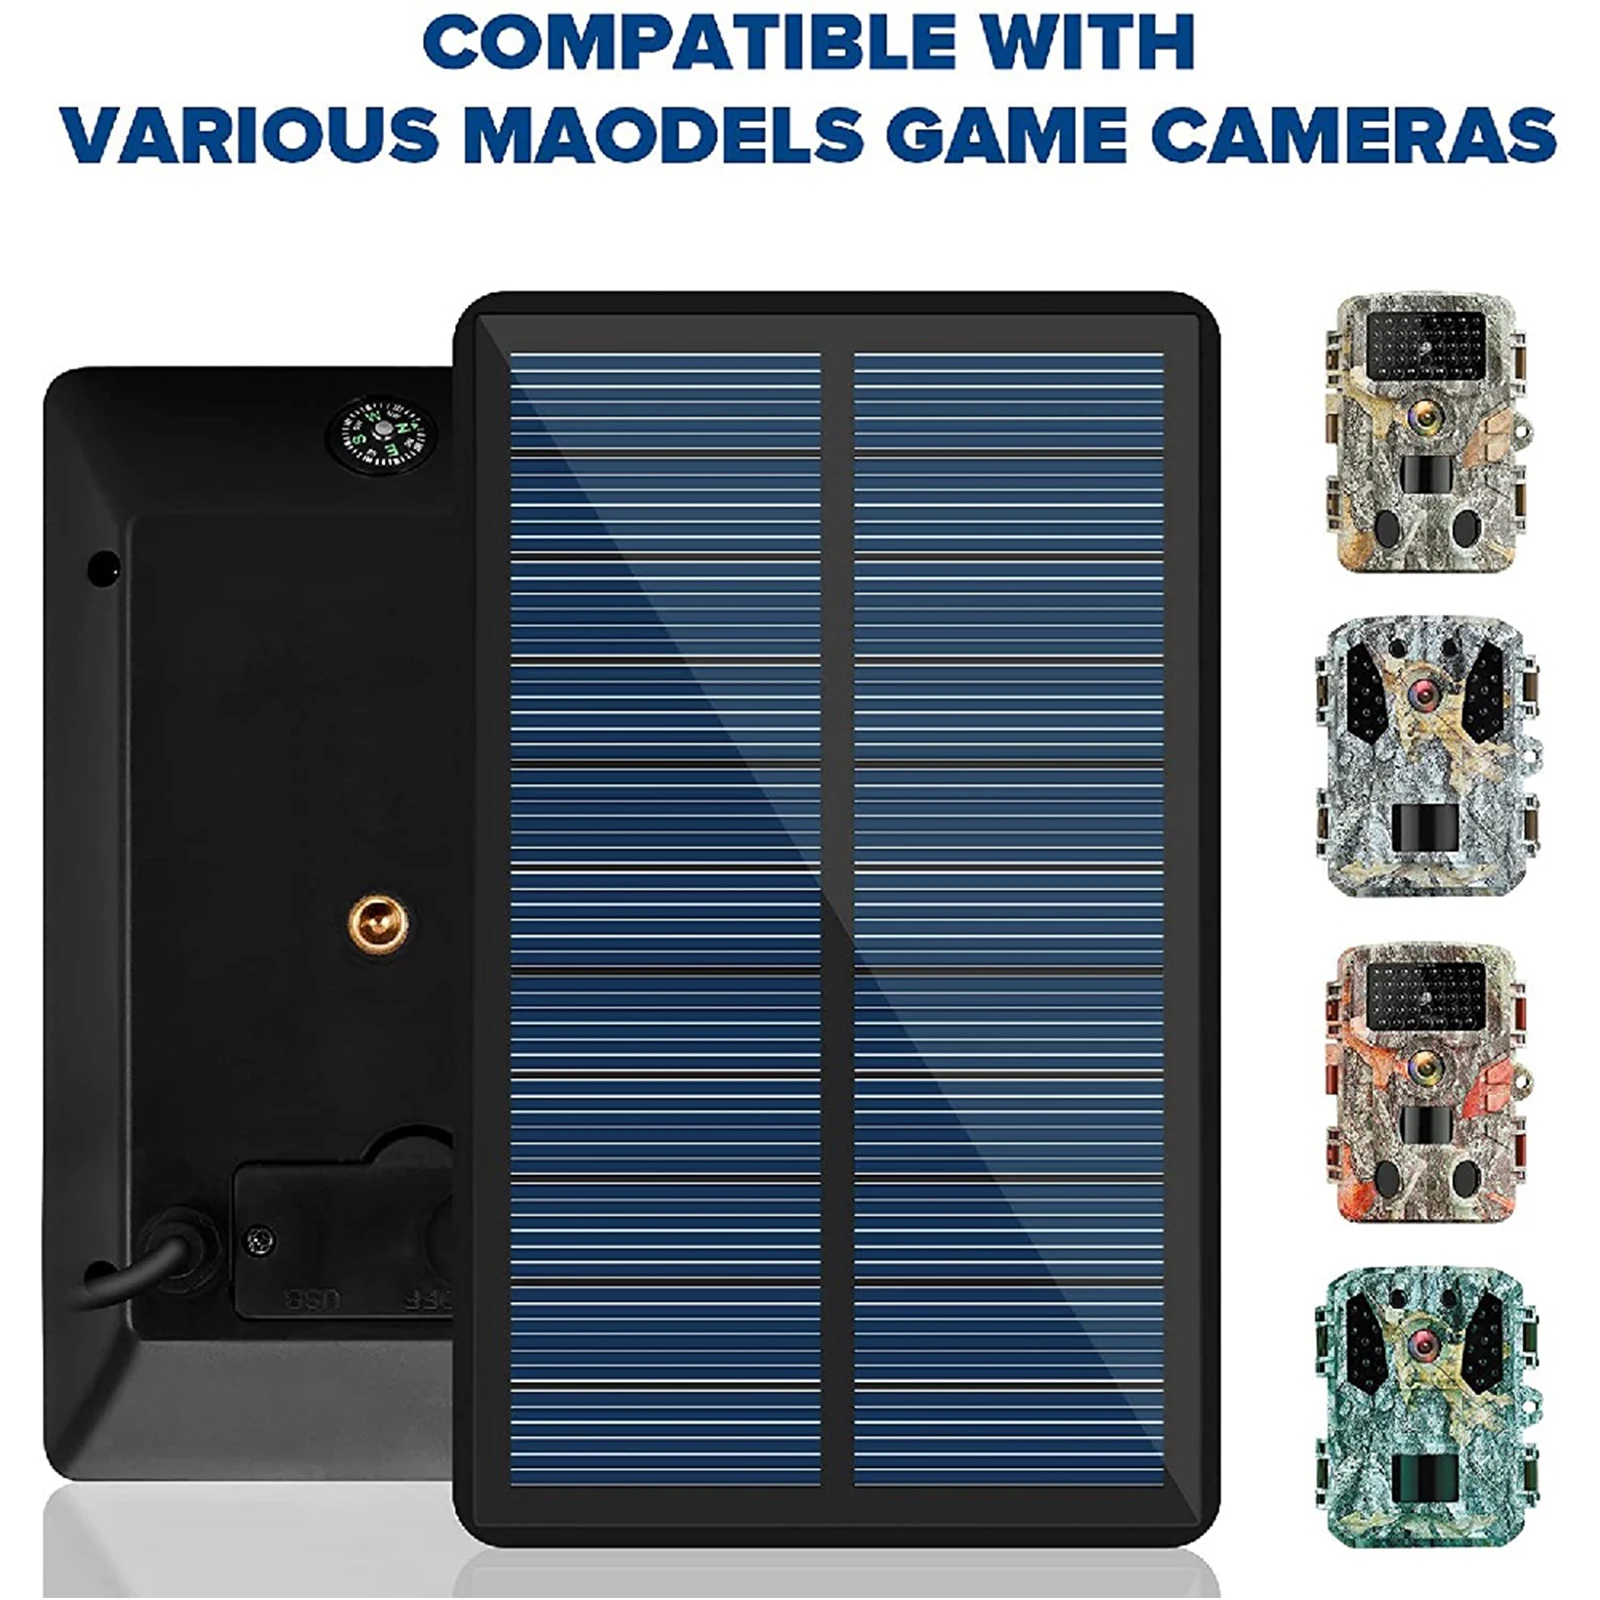 

12V/1A 6V/2A Solar Panel IP65 Waterproof Solar Panel Built-in Rechargeable Battery for Hunting Outdoor Camera